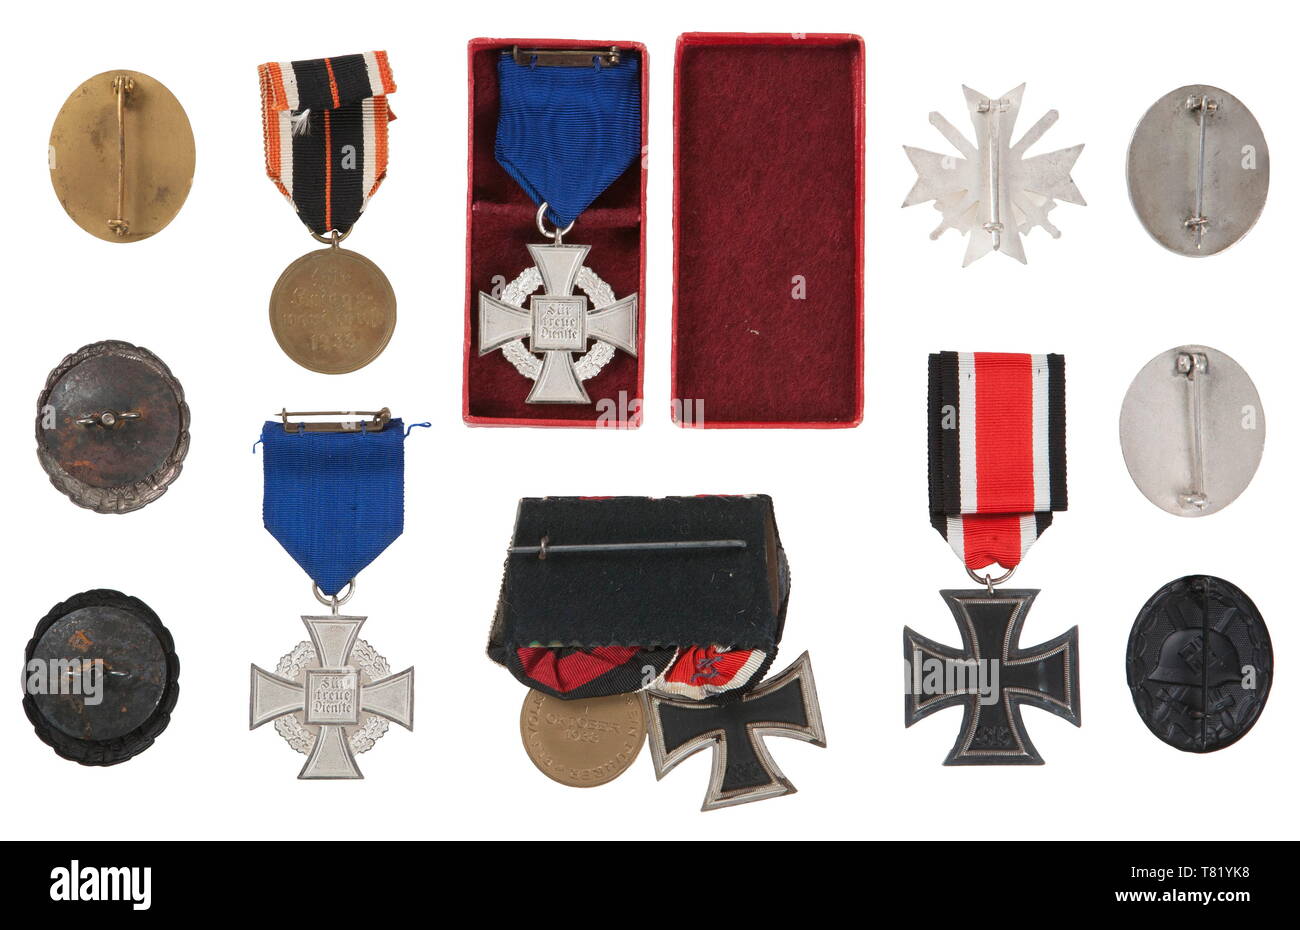 A collection of awards. 1938 25 years Faithful Service Cross in case, 1938 25 years Faithful Service Cross in Silver, 1st Type Black and Silver Wound Badge, 2nd Type Black, Gold and two Silver Wound Badge's, 2 Place Medal Bar ( EK II & Oct 1938 occupation), 1939 War Merit Cross with Swords 1st Class, 1939 Iron Cross 2nd Class, and 1939 War Merit Medal. USA-lot historic, historical, awards, award, German Reich, Third Reich, Nazi era, National Socialism, object, objects, stills, medal, decoration, medals, decorations, clipping, cut out, cut-out, cut-outs, honor, honour, Natio, Editorial-Use-Only Stock Photo